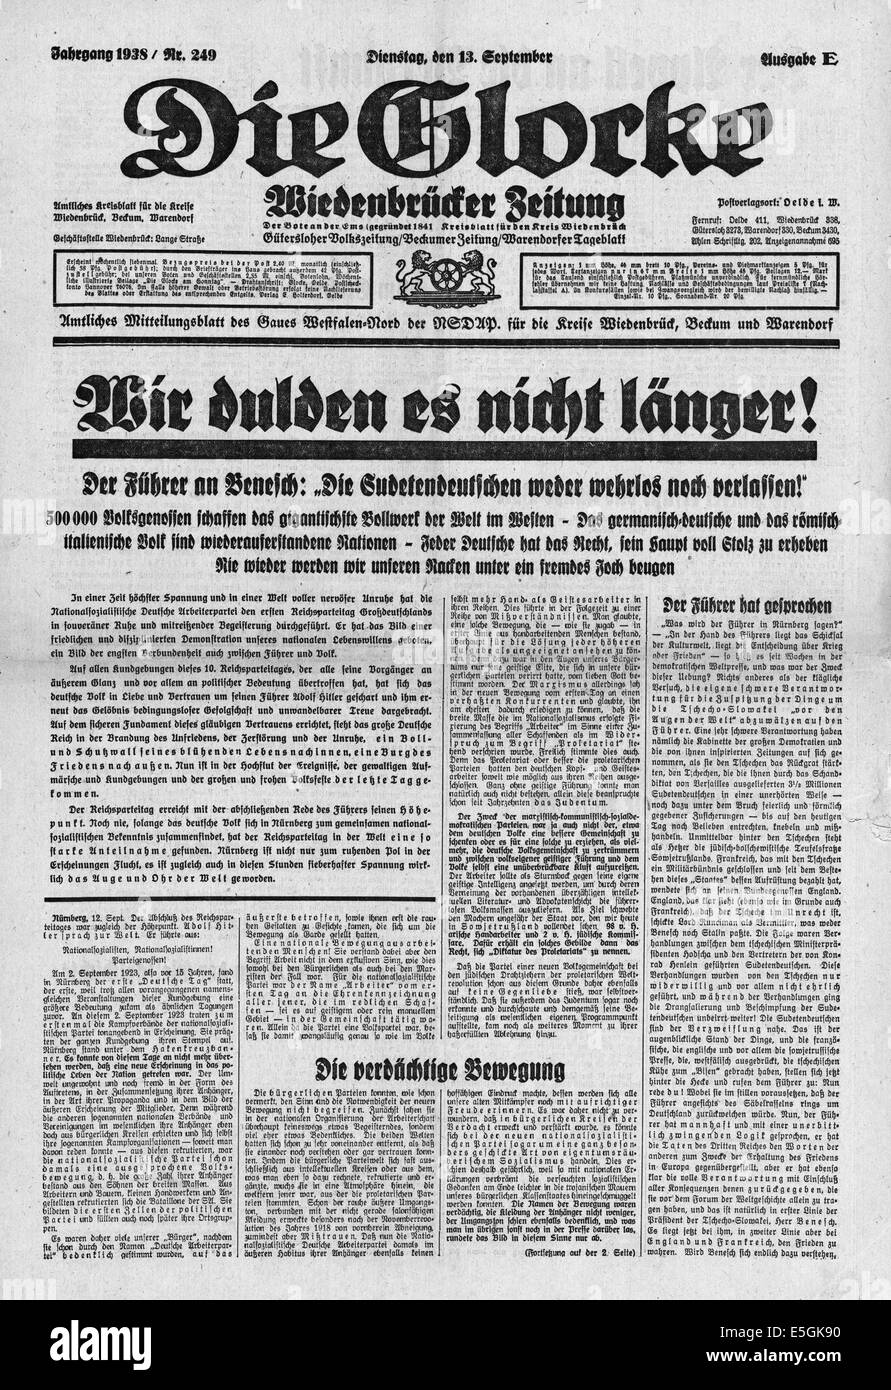 Die Glocke (Germany) front page reporting Adolf Hitler's speech on the  Sudetenland calling on Czech leader Edvard Beneš that the Sudetenland  situation will no longer be tolerated Stock Photo - Alamy